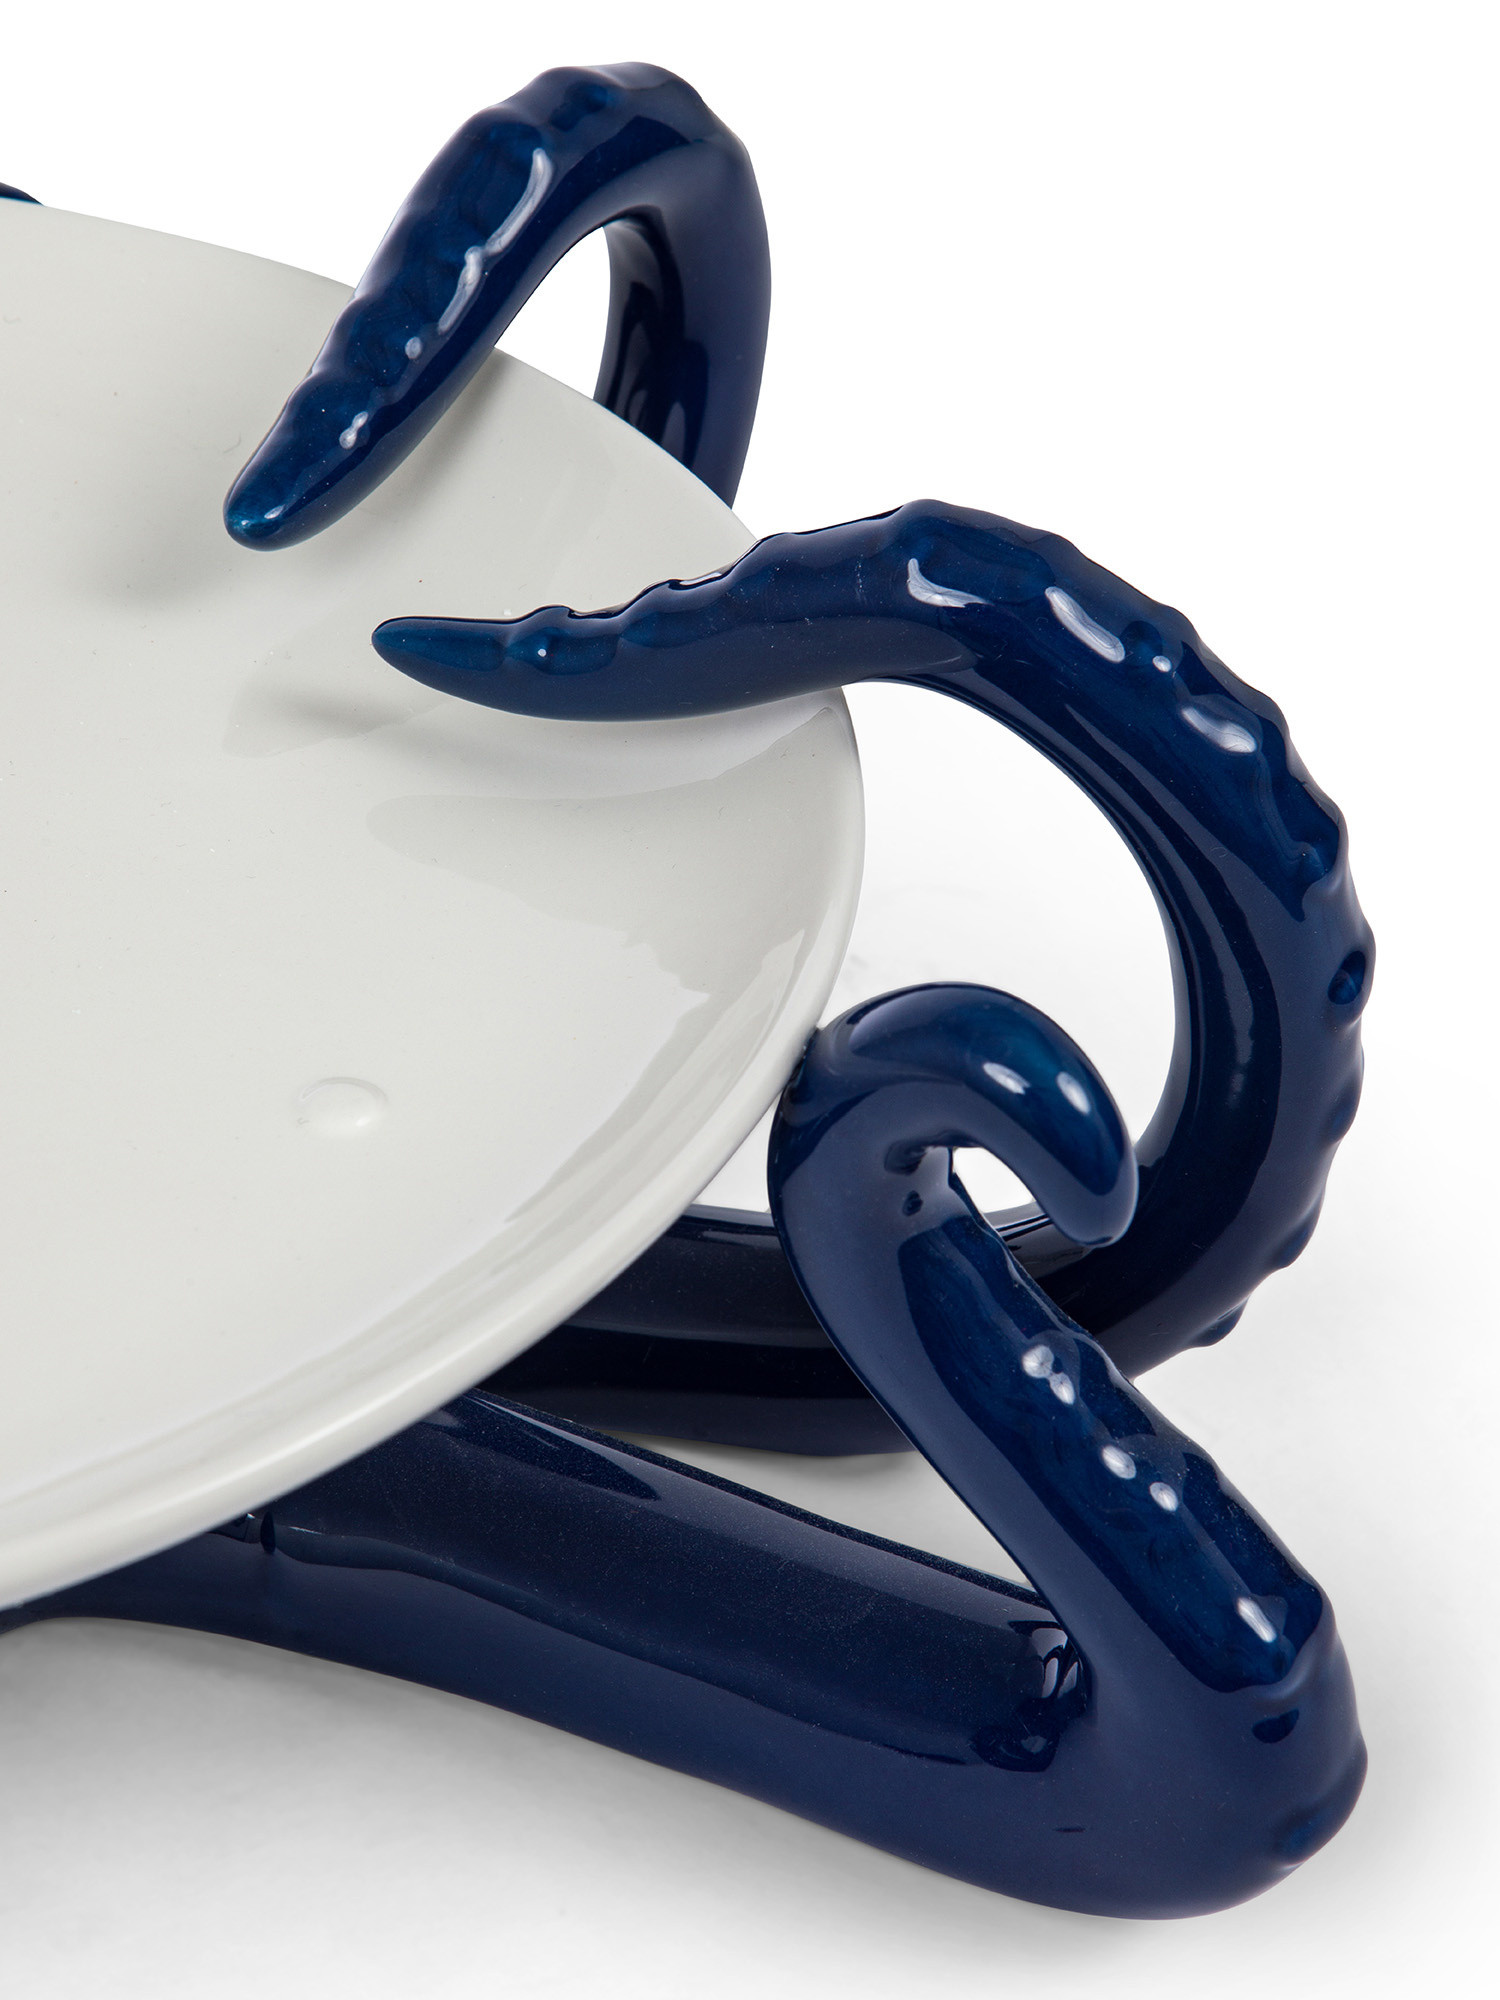 Octopus stand, White / Blue, large image number 1